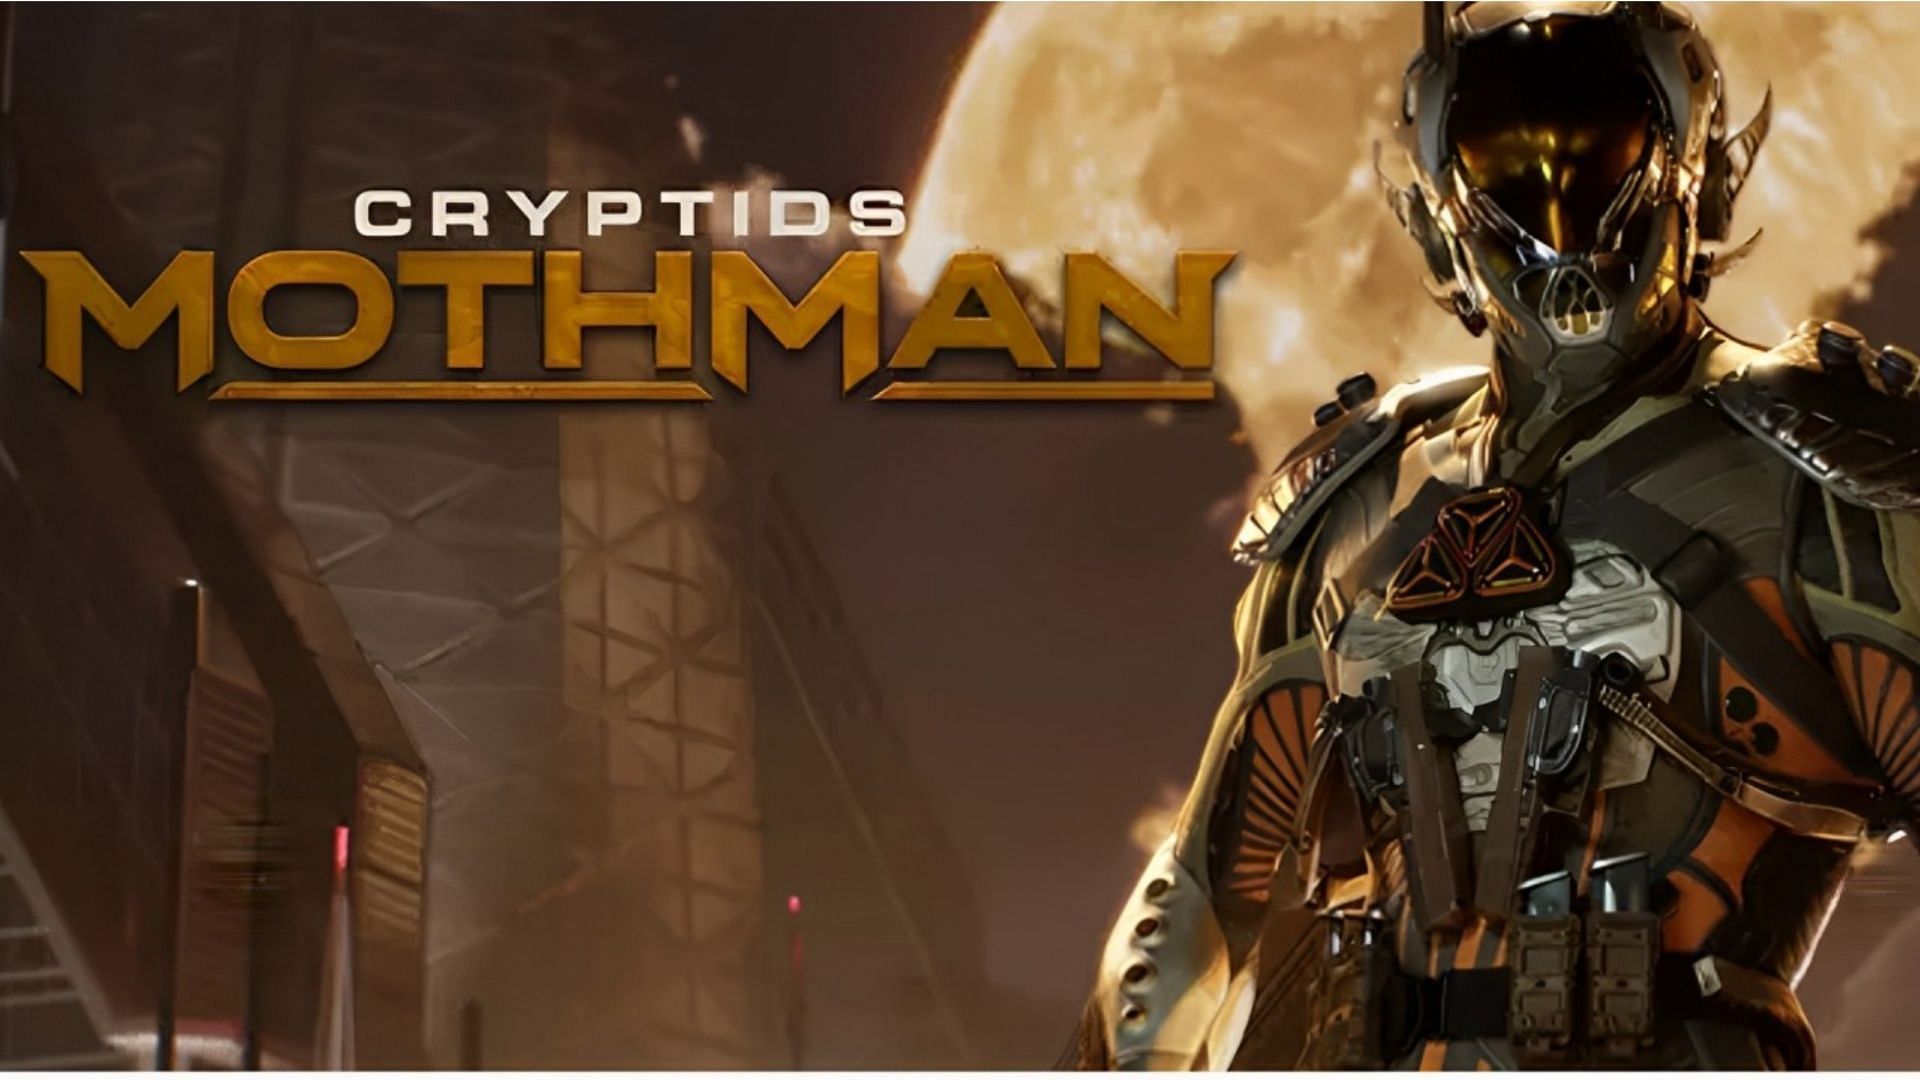 Cryptids Mothman bundle in MW3 and Warzone (Image via Activision)